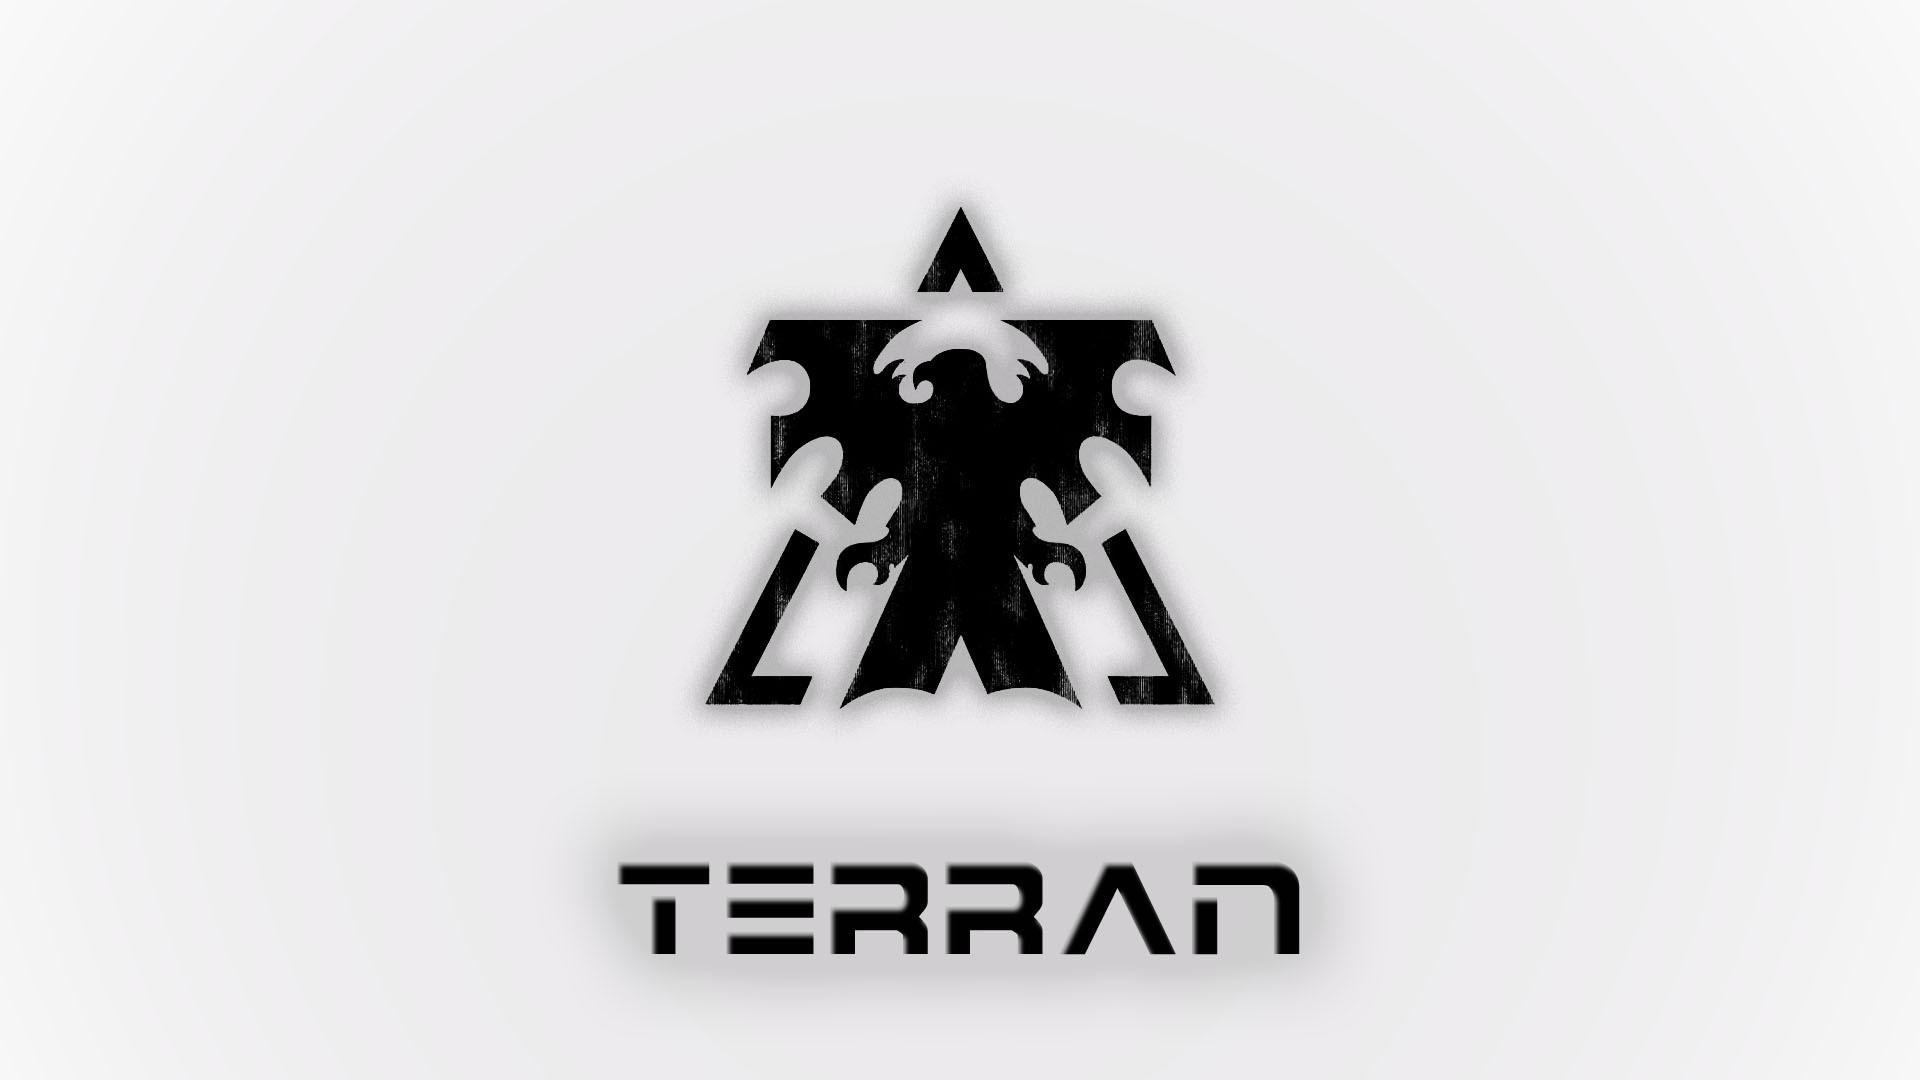 HD wallpaper, Pc Gaming, Minimalism, Simple Background, White Background, Video Games, Terran, Starcraft, Science Fiction